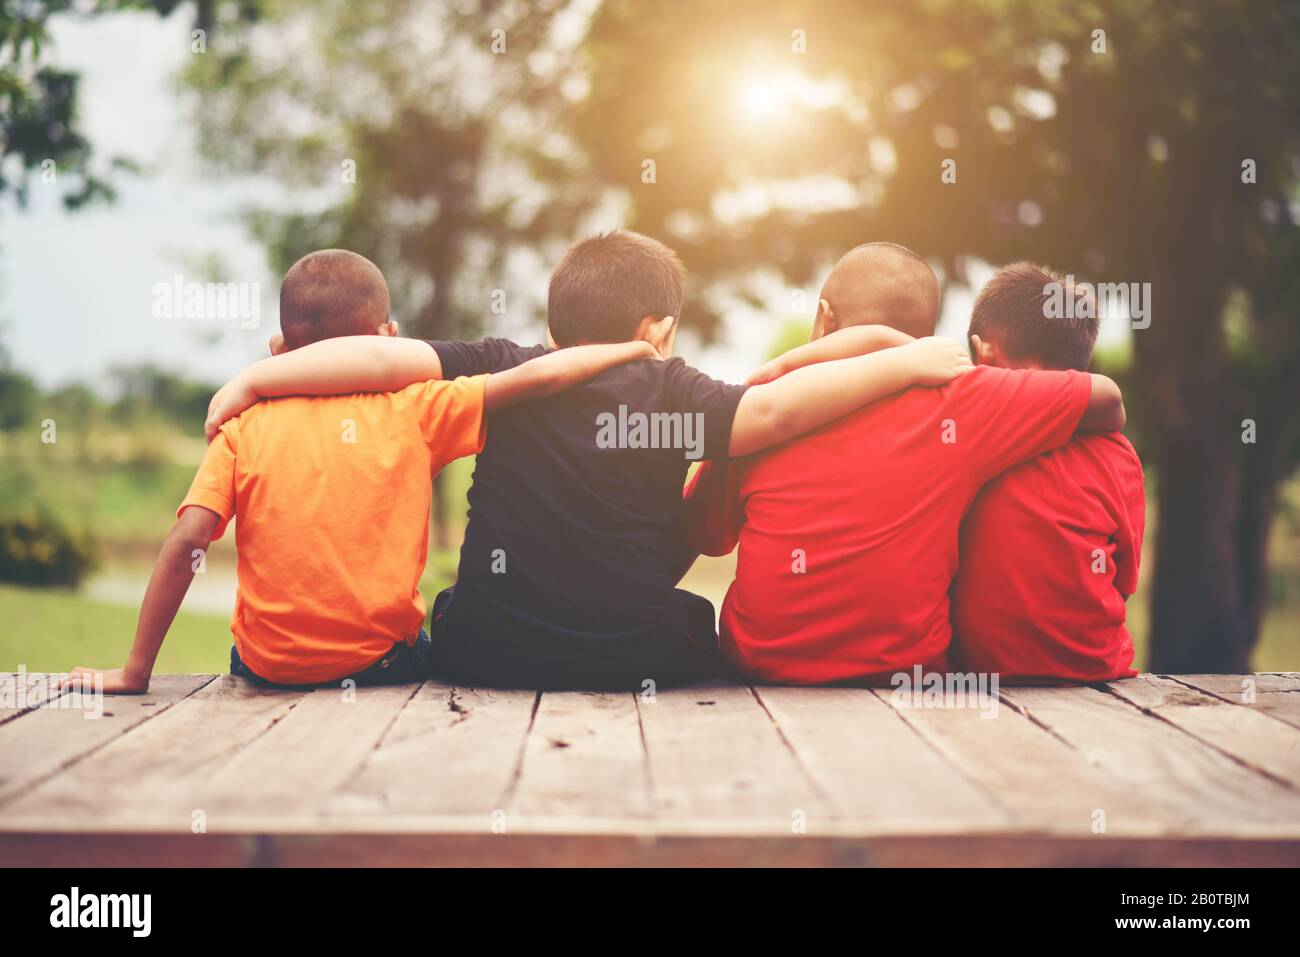 Group of kids friends arm around sitting together Stock Photo